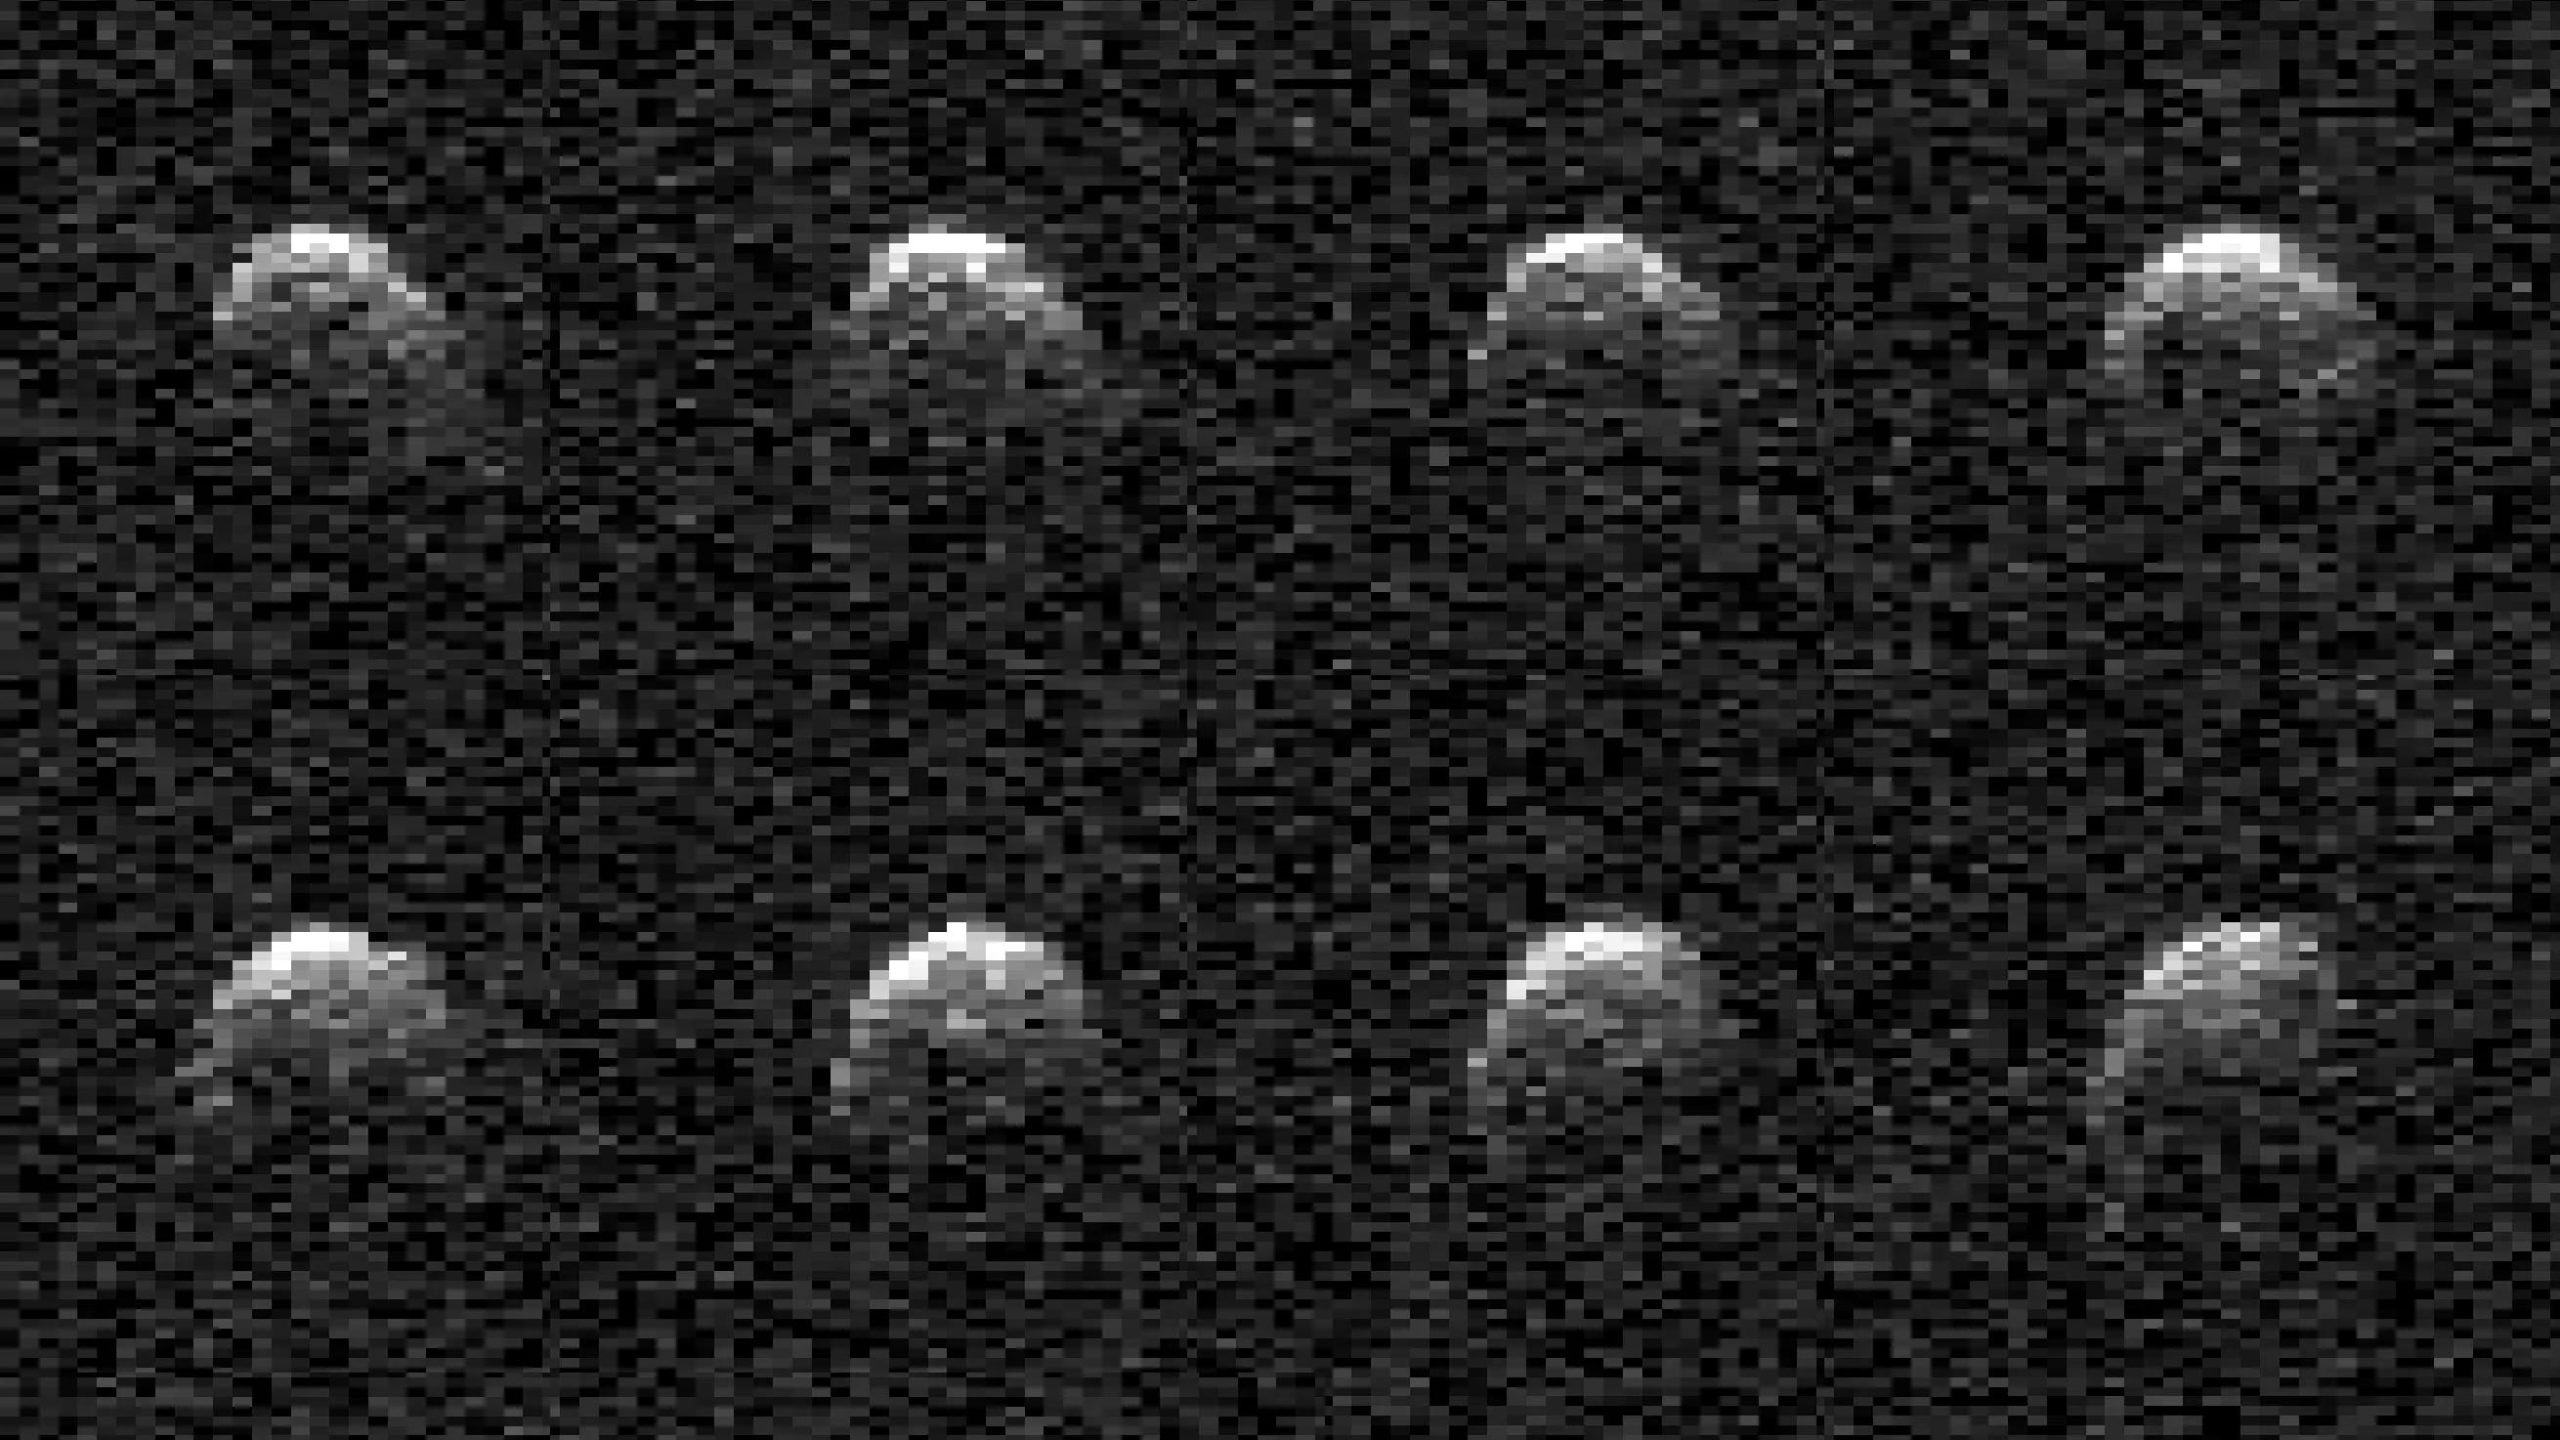 NASA's Planetary Radar images the asteroid as it approaches Earth